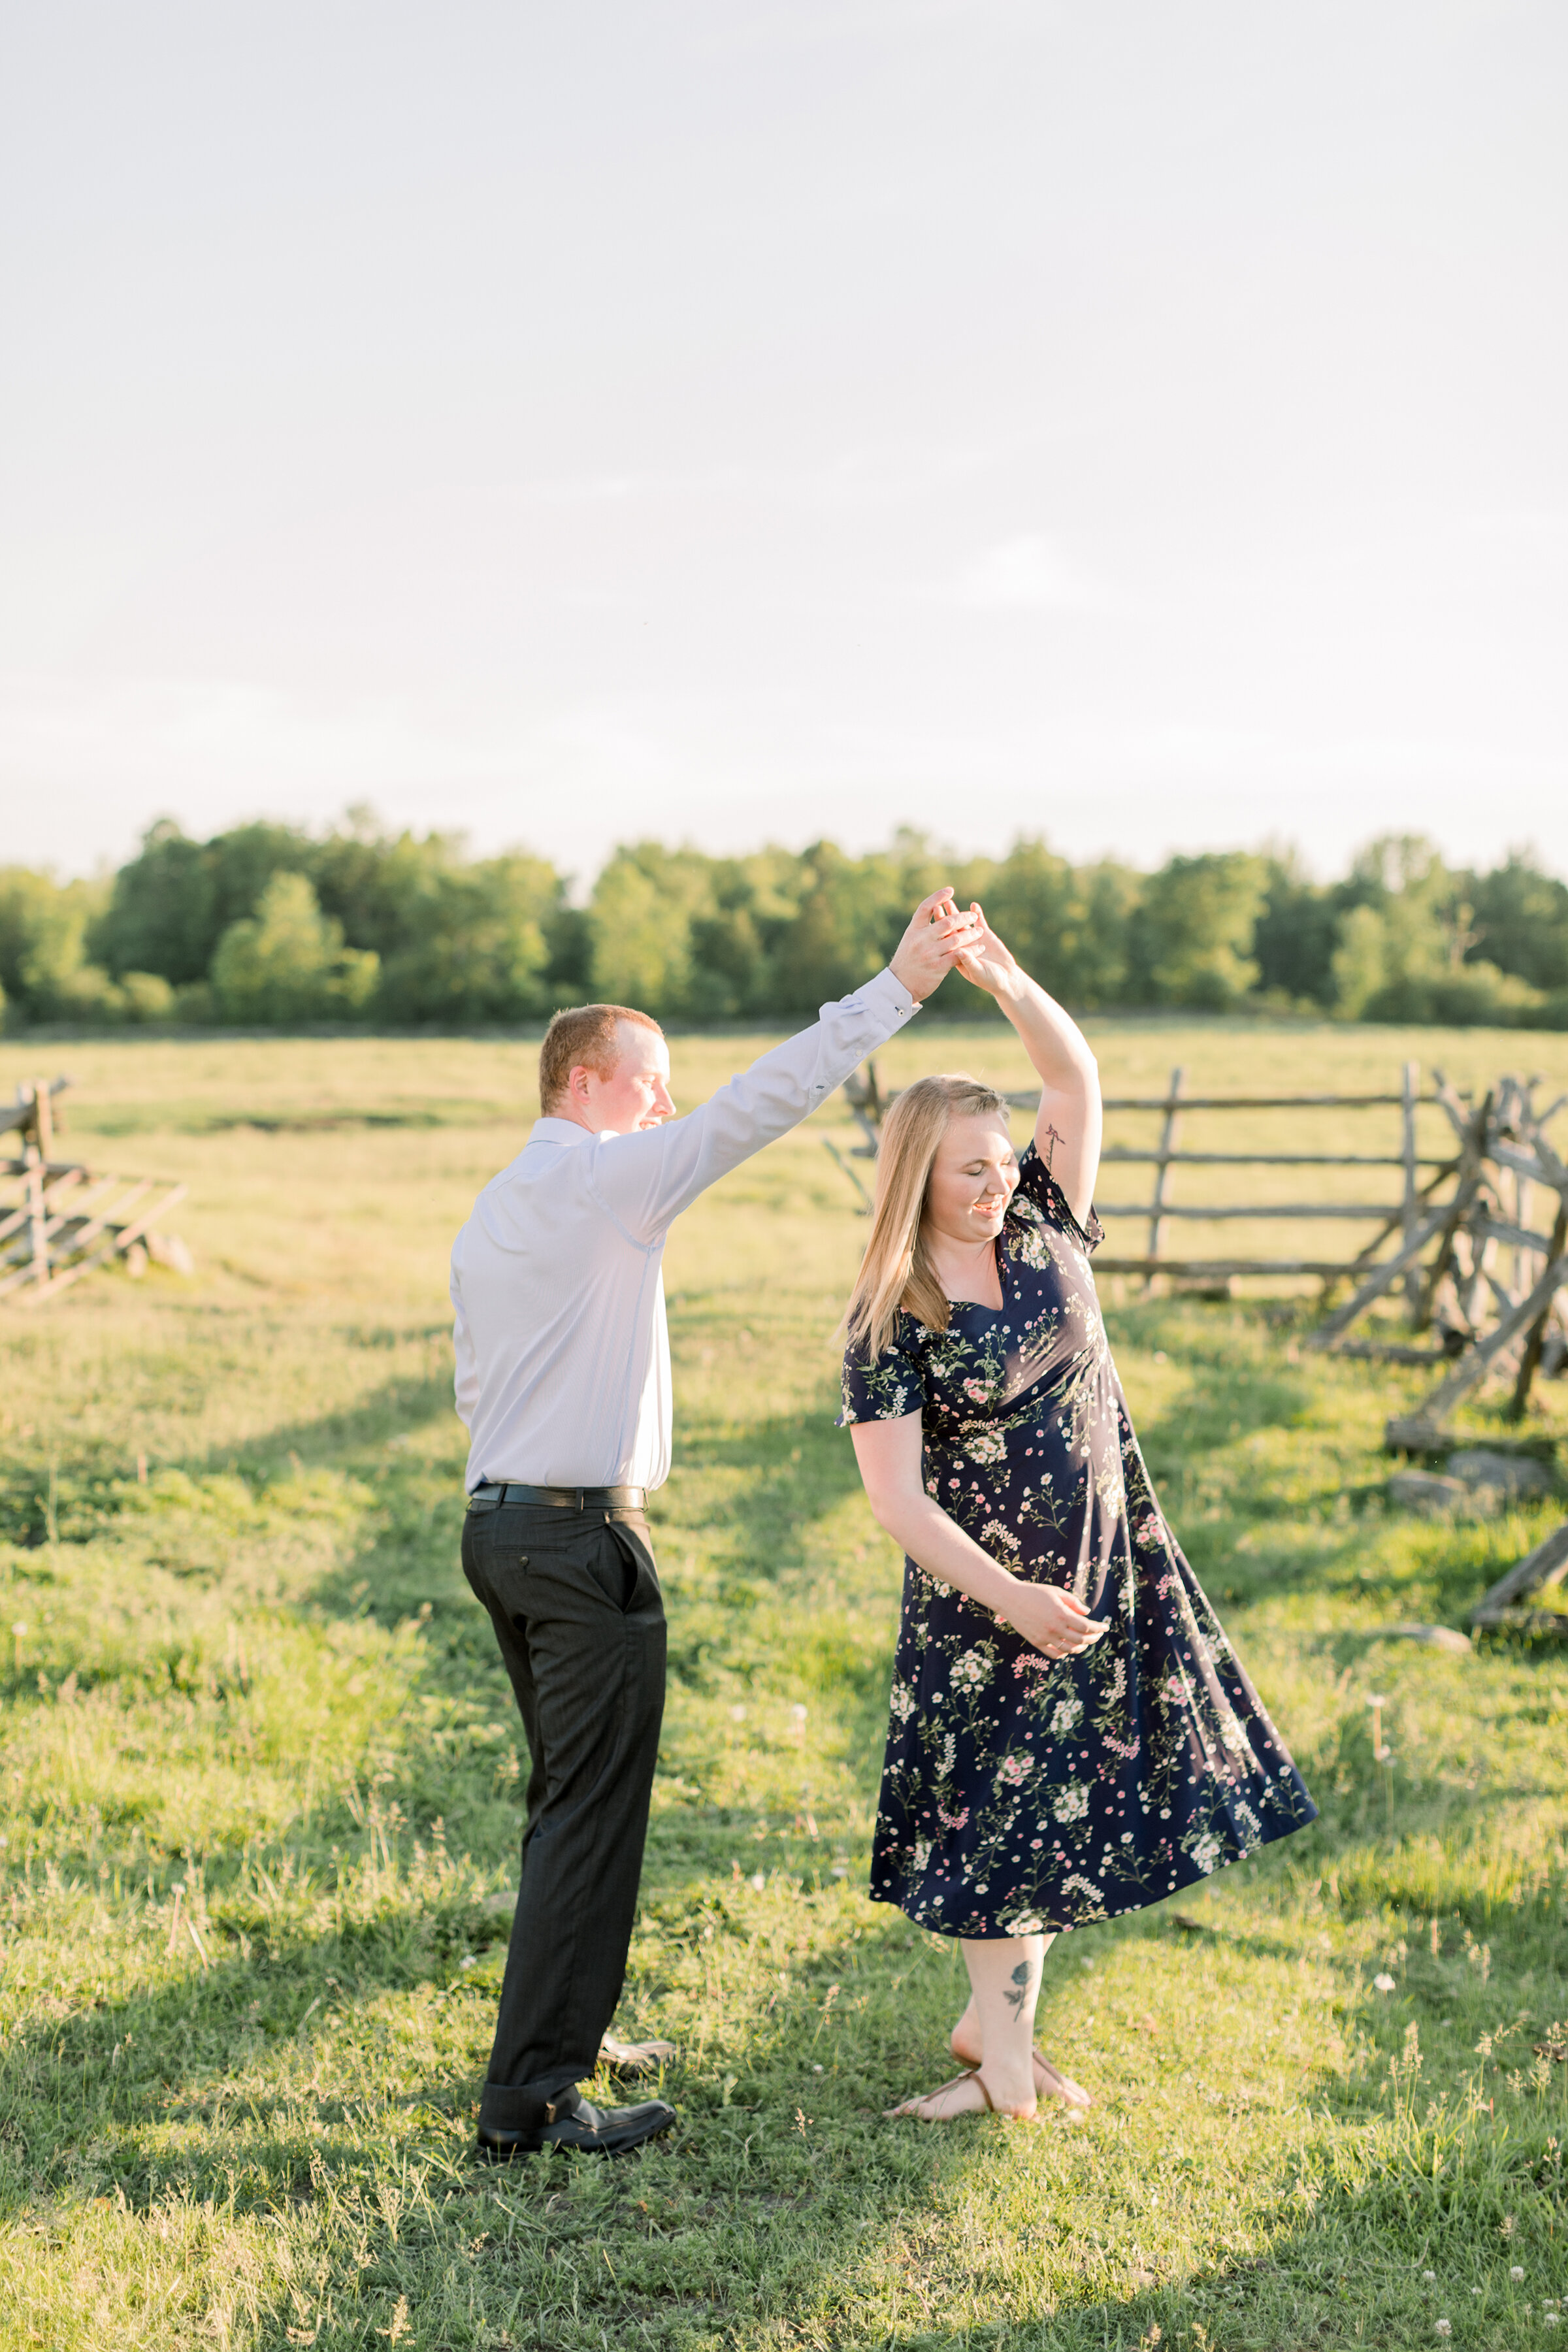  A couple dance in the fields in a bright and airy engagement session by professional engagement photographer Chelsea Mason Photography. Outdoor engagement session inspiration ideas and goals for country brides semi formal attire women’s sundress ins